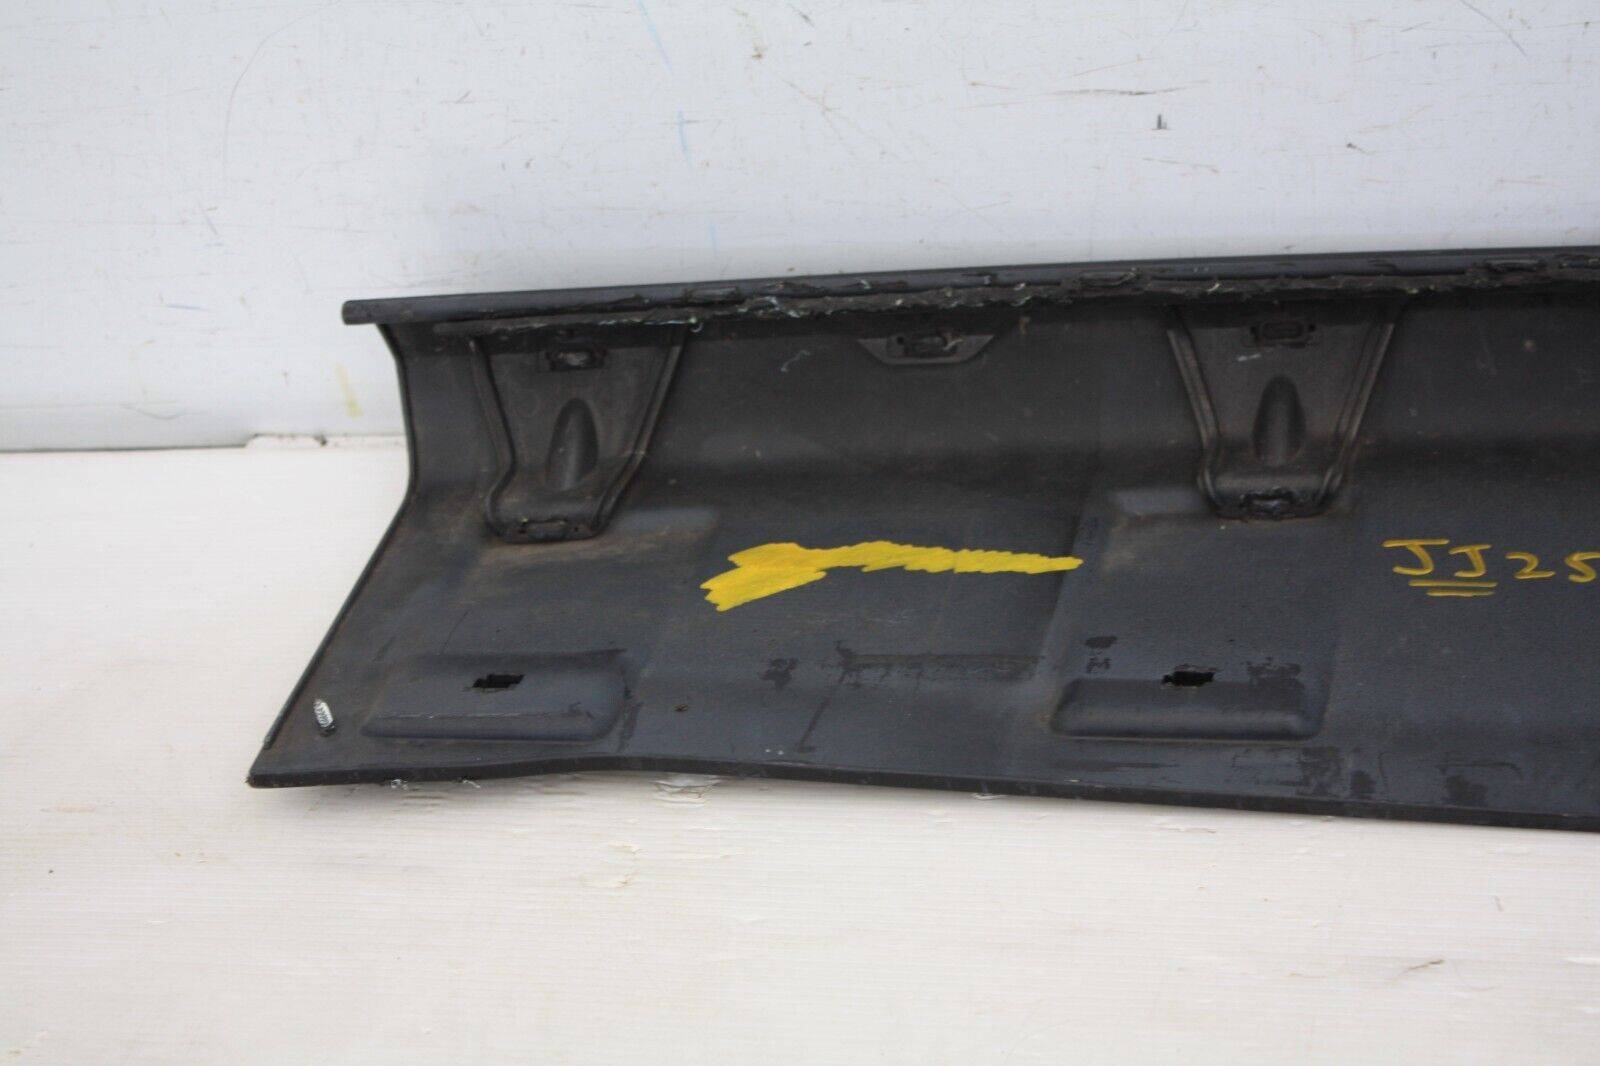 Range-Rover-Autobiography-Front-Bumper-Lower-Section-BH4M-17F021-A-SEE-PICS-175744651531-16